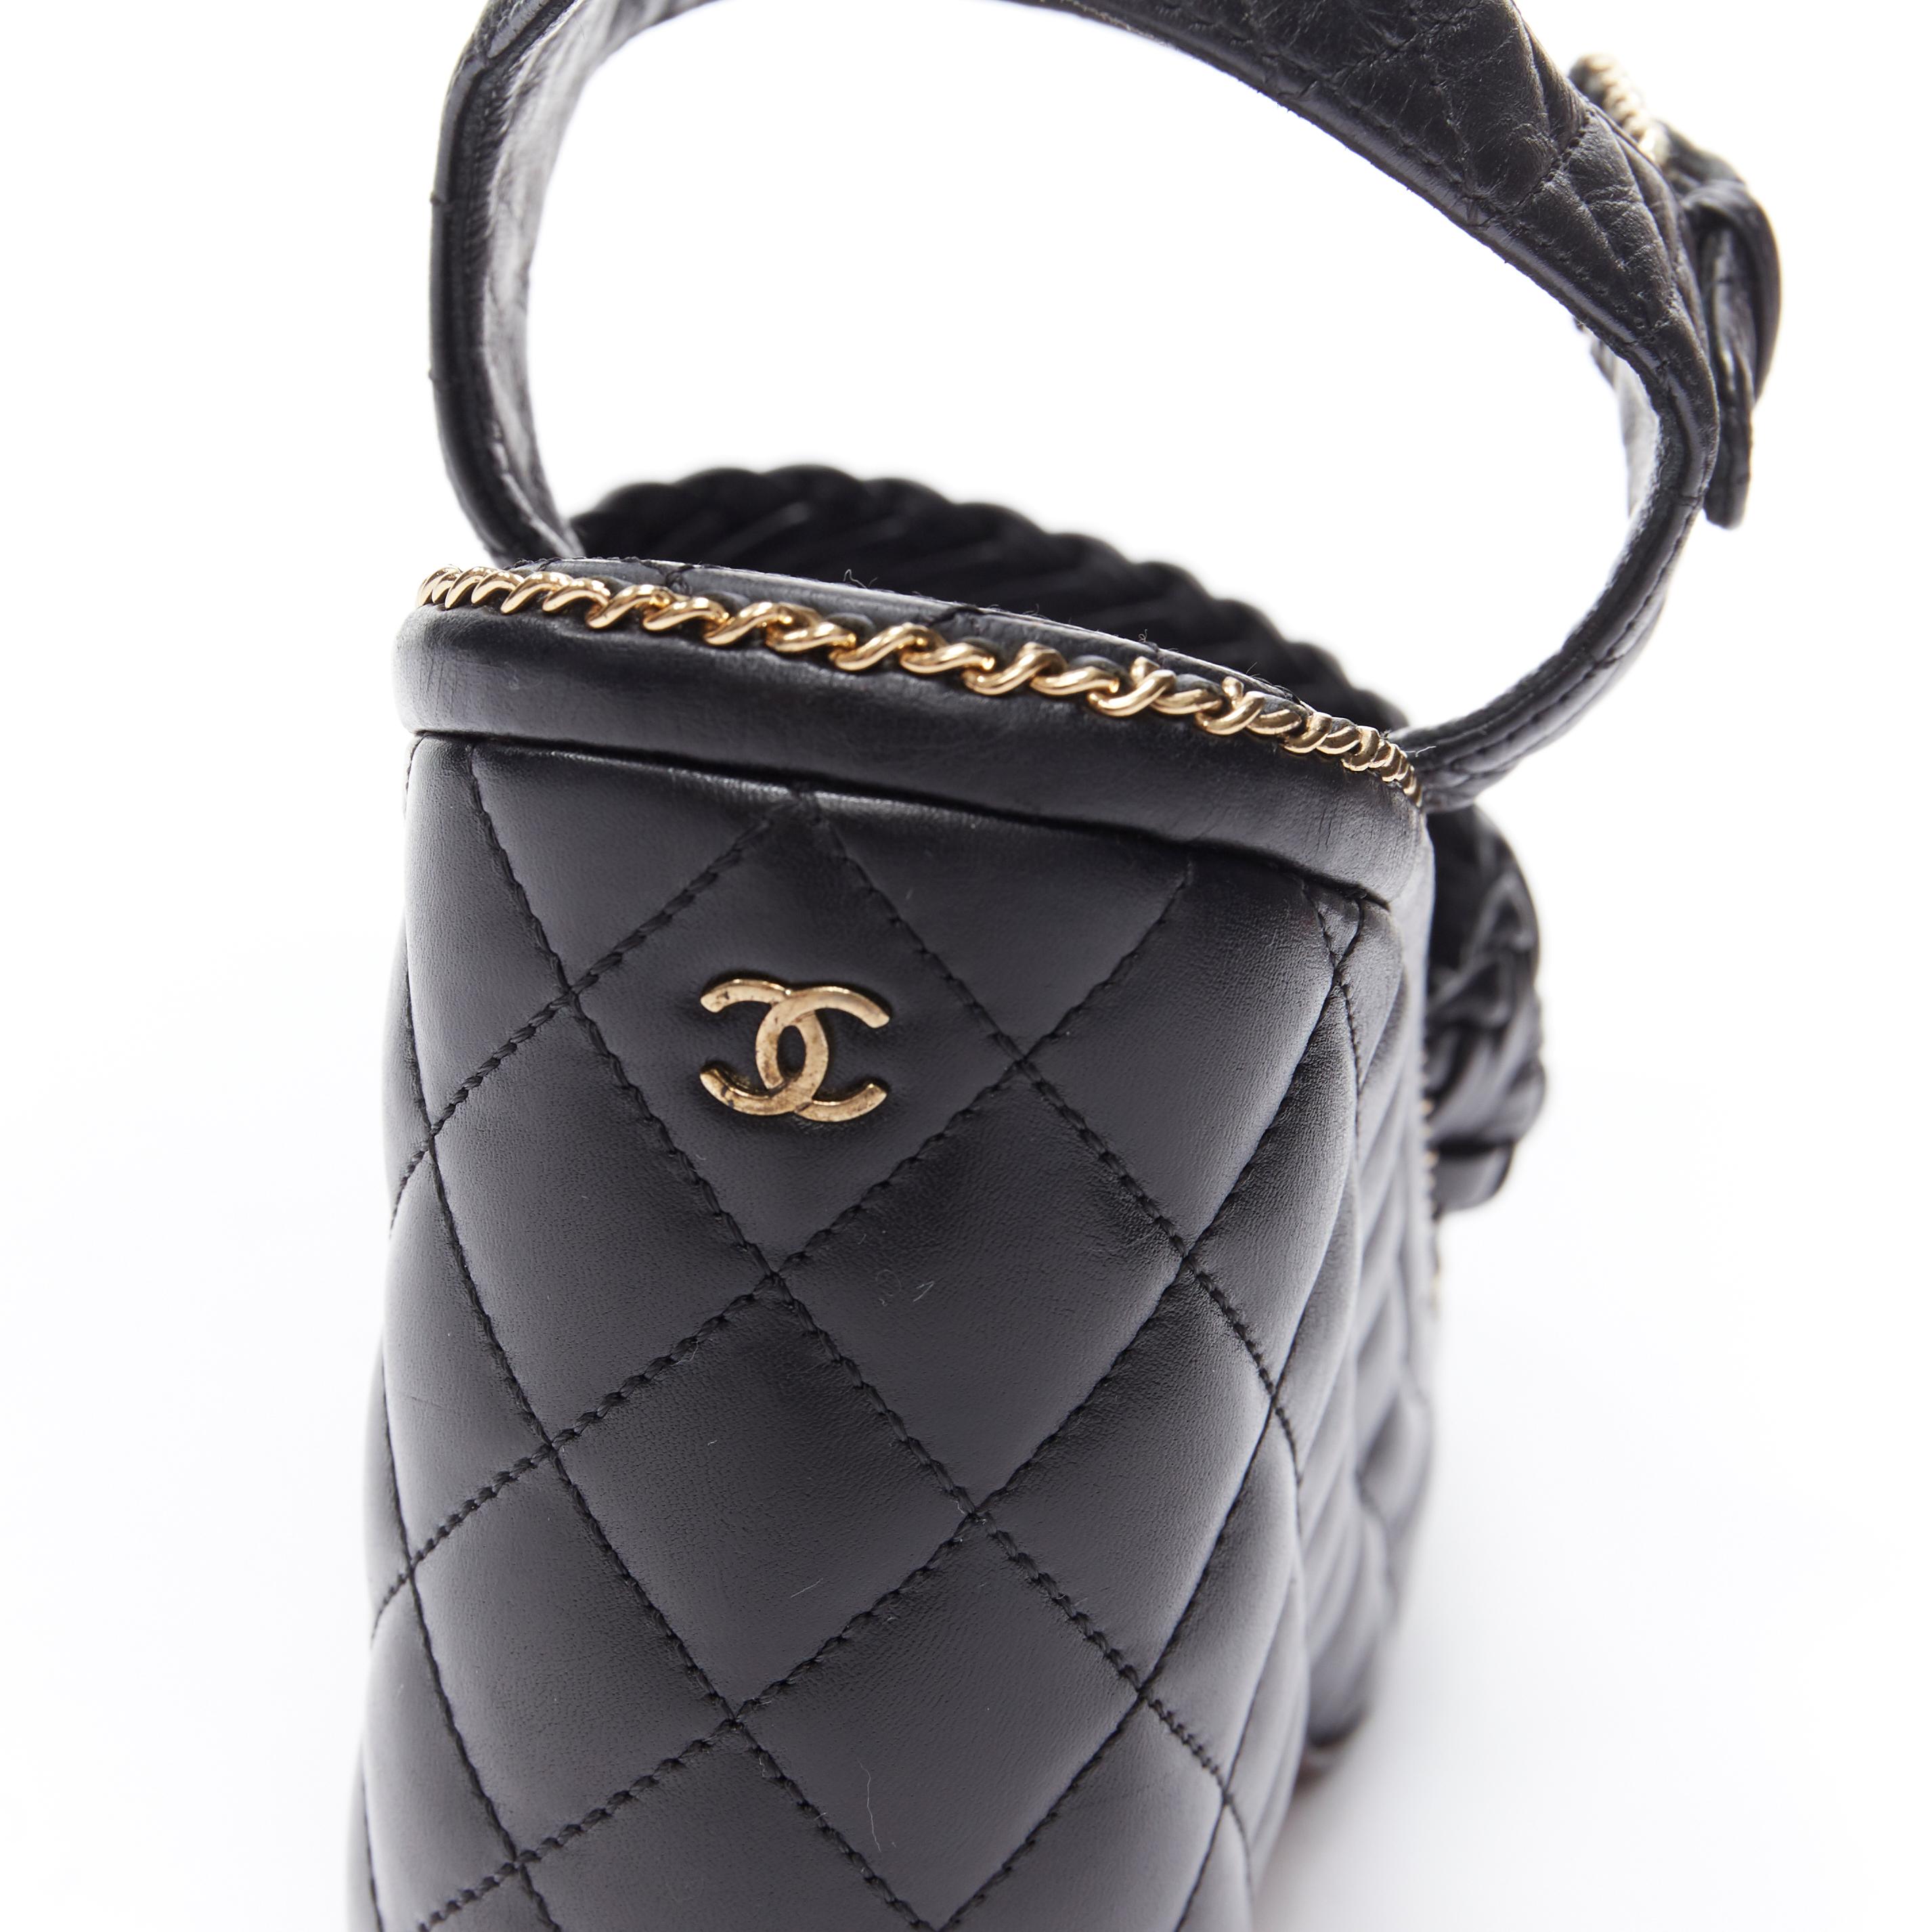 CHANEL SS15 black braided leather 2.55 chain diamond quilted wedge sandal EU39 1